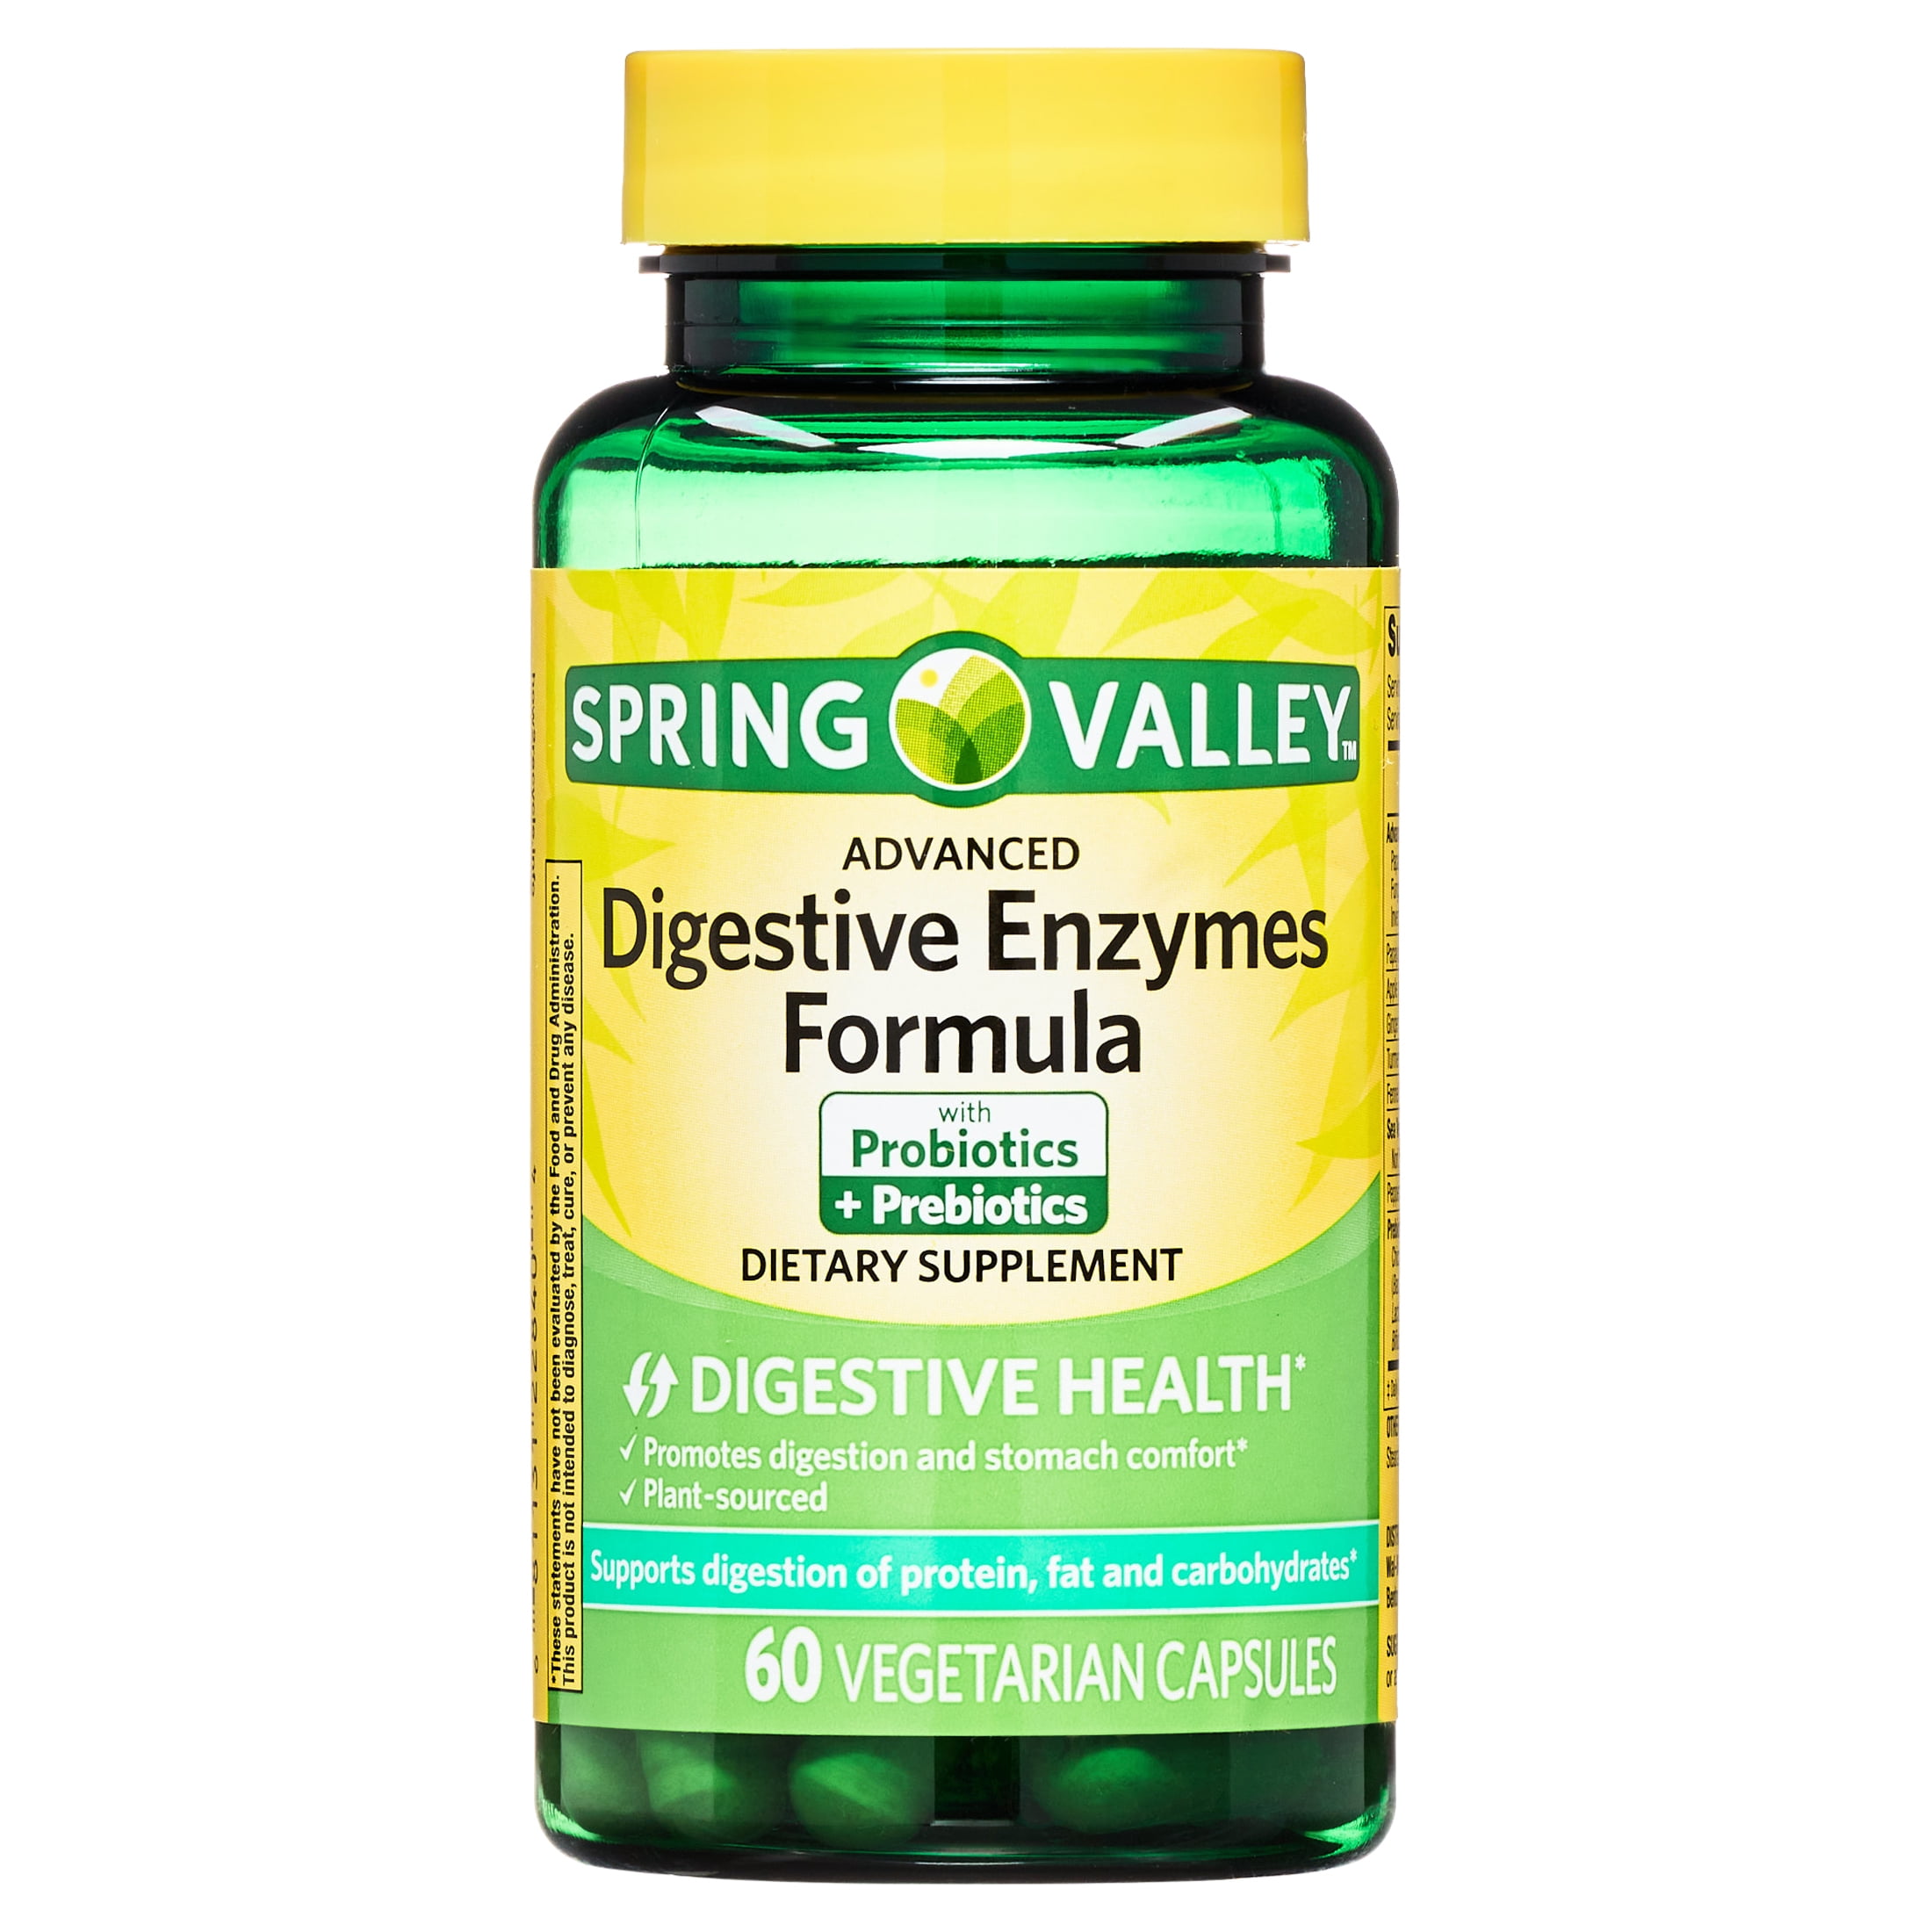 Affordable digestive health supplements